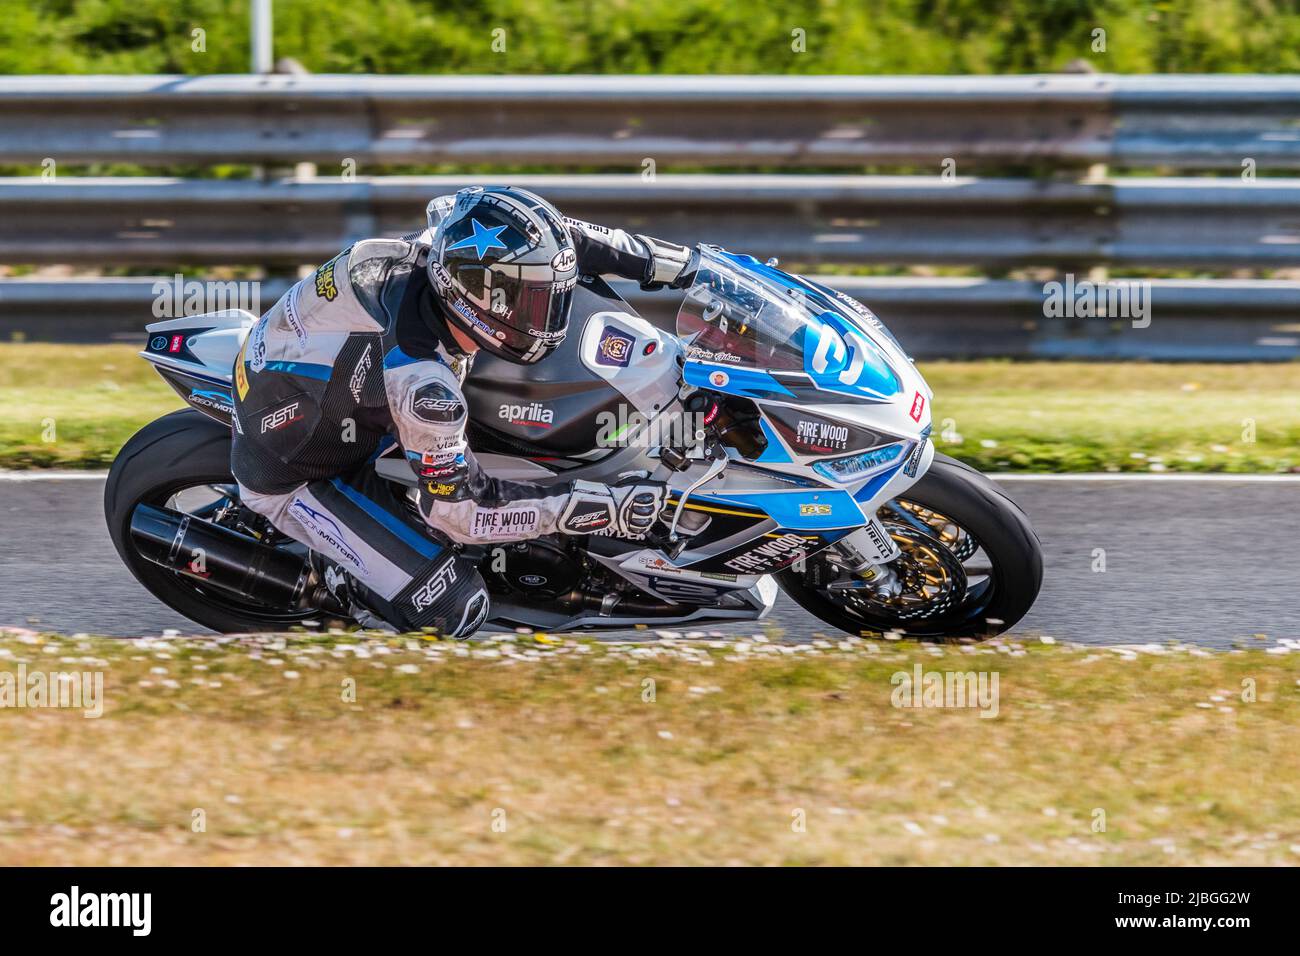 Motorcycle racer in action at Kirkistown Race Circuit, Northern Ireland Stock Photo